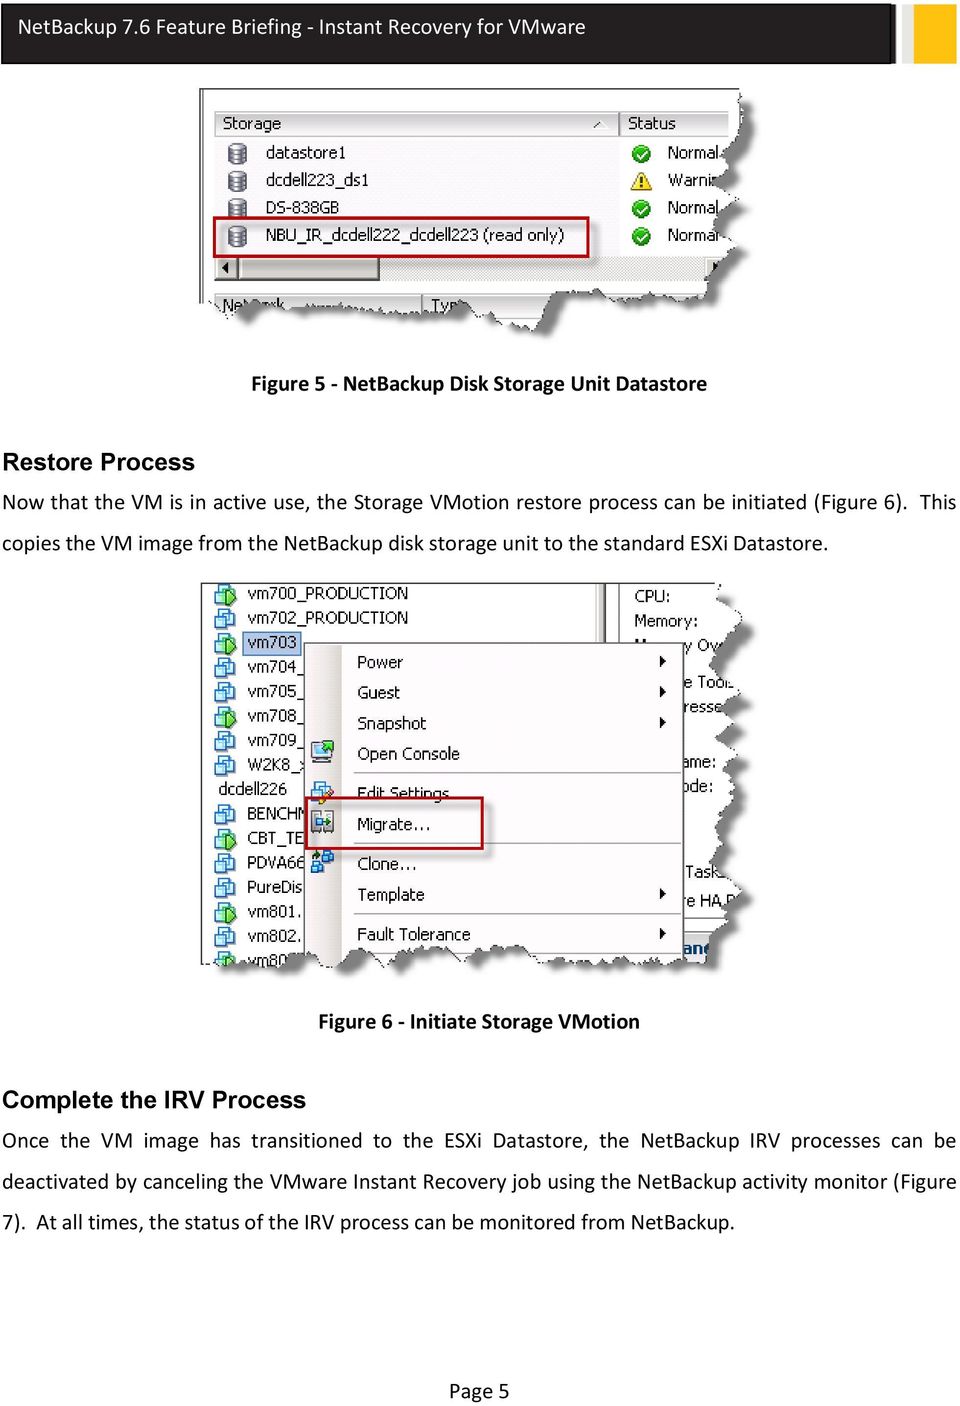 Figure 6 - Initiate Storage VMotion Complete the IRV Process Once the VM image has transitioned to the ESXi Datastore, the NetBackup IRV processes can